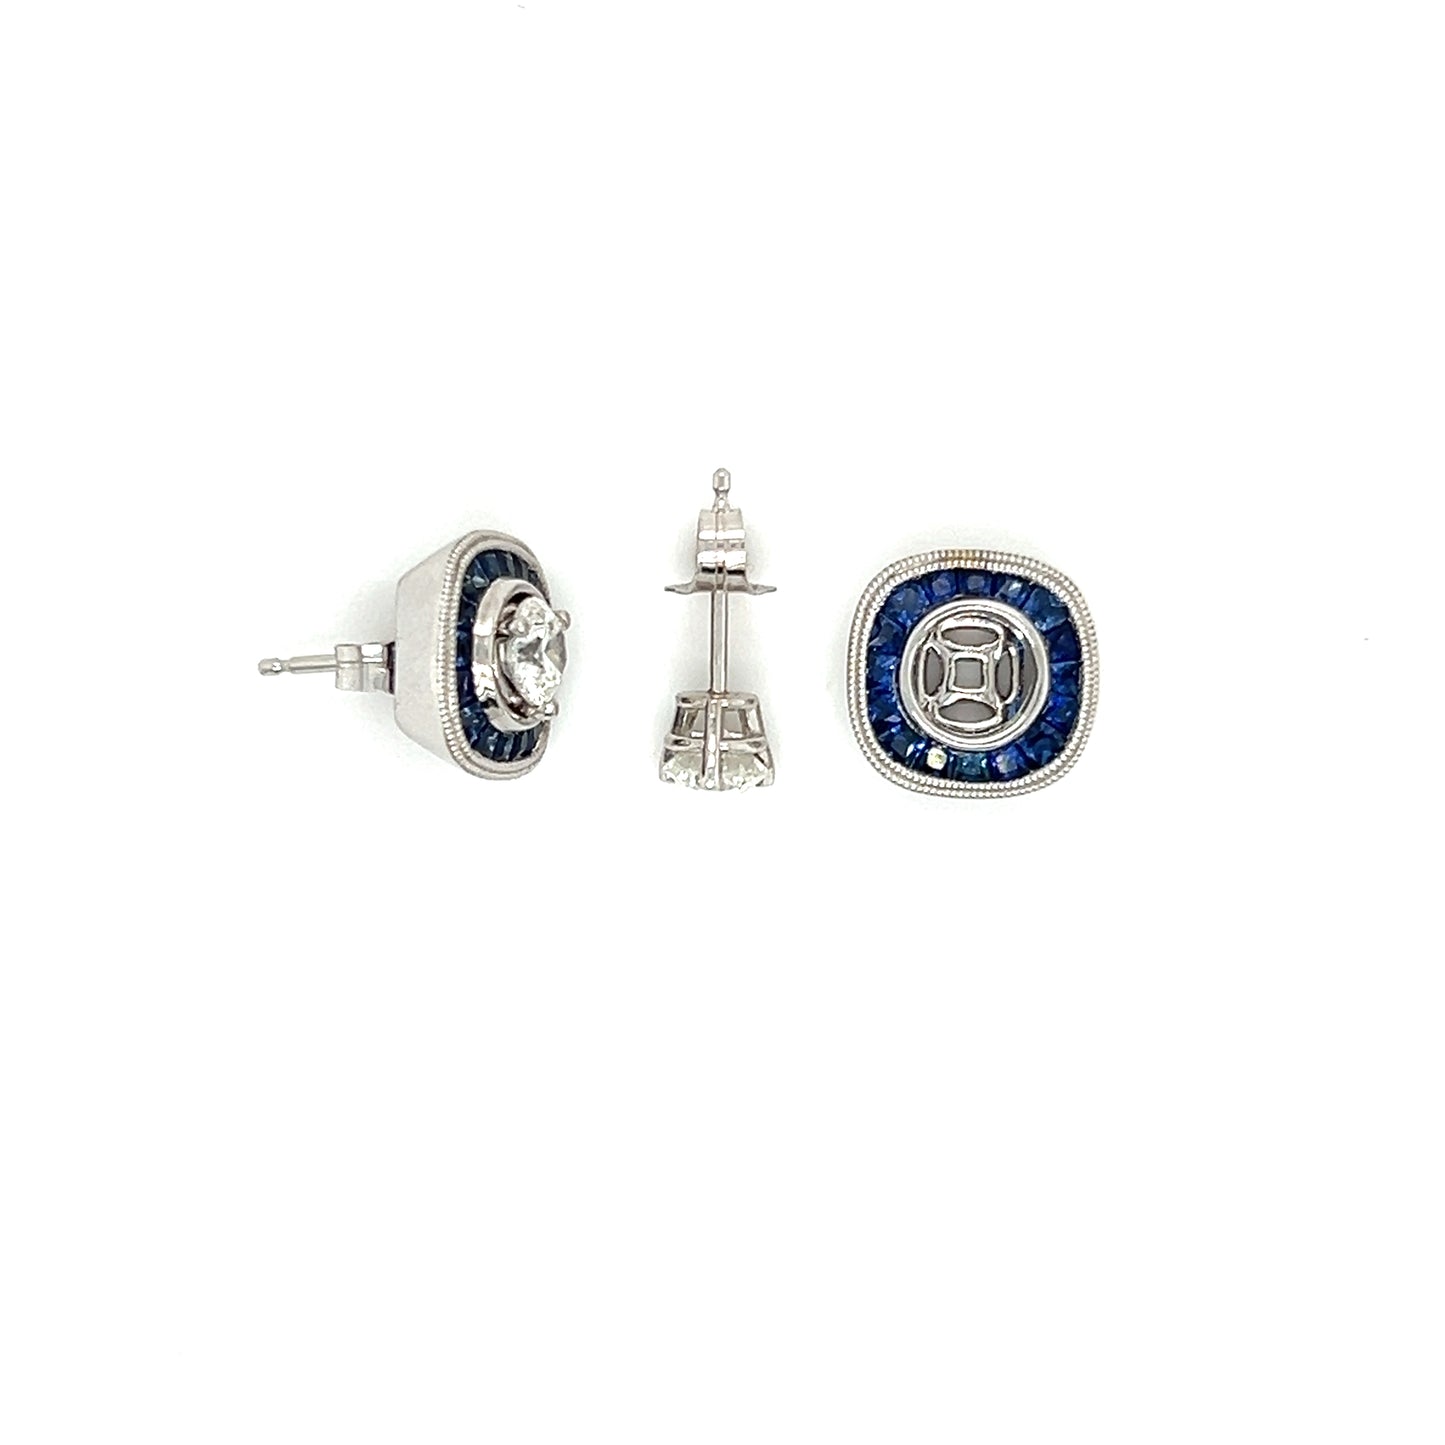 Diamond 0.72ctw Stud Earrings with Blue Sapphire Jackets in 14K White Gold Top View